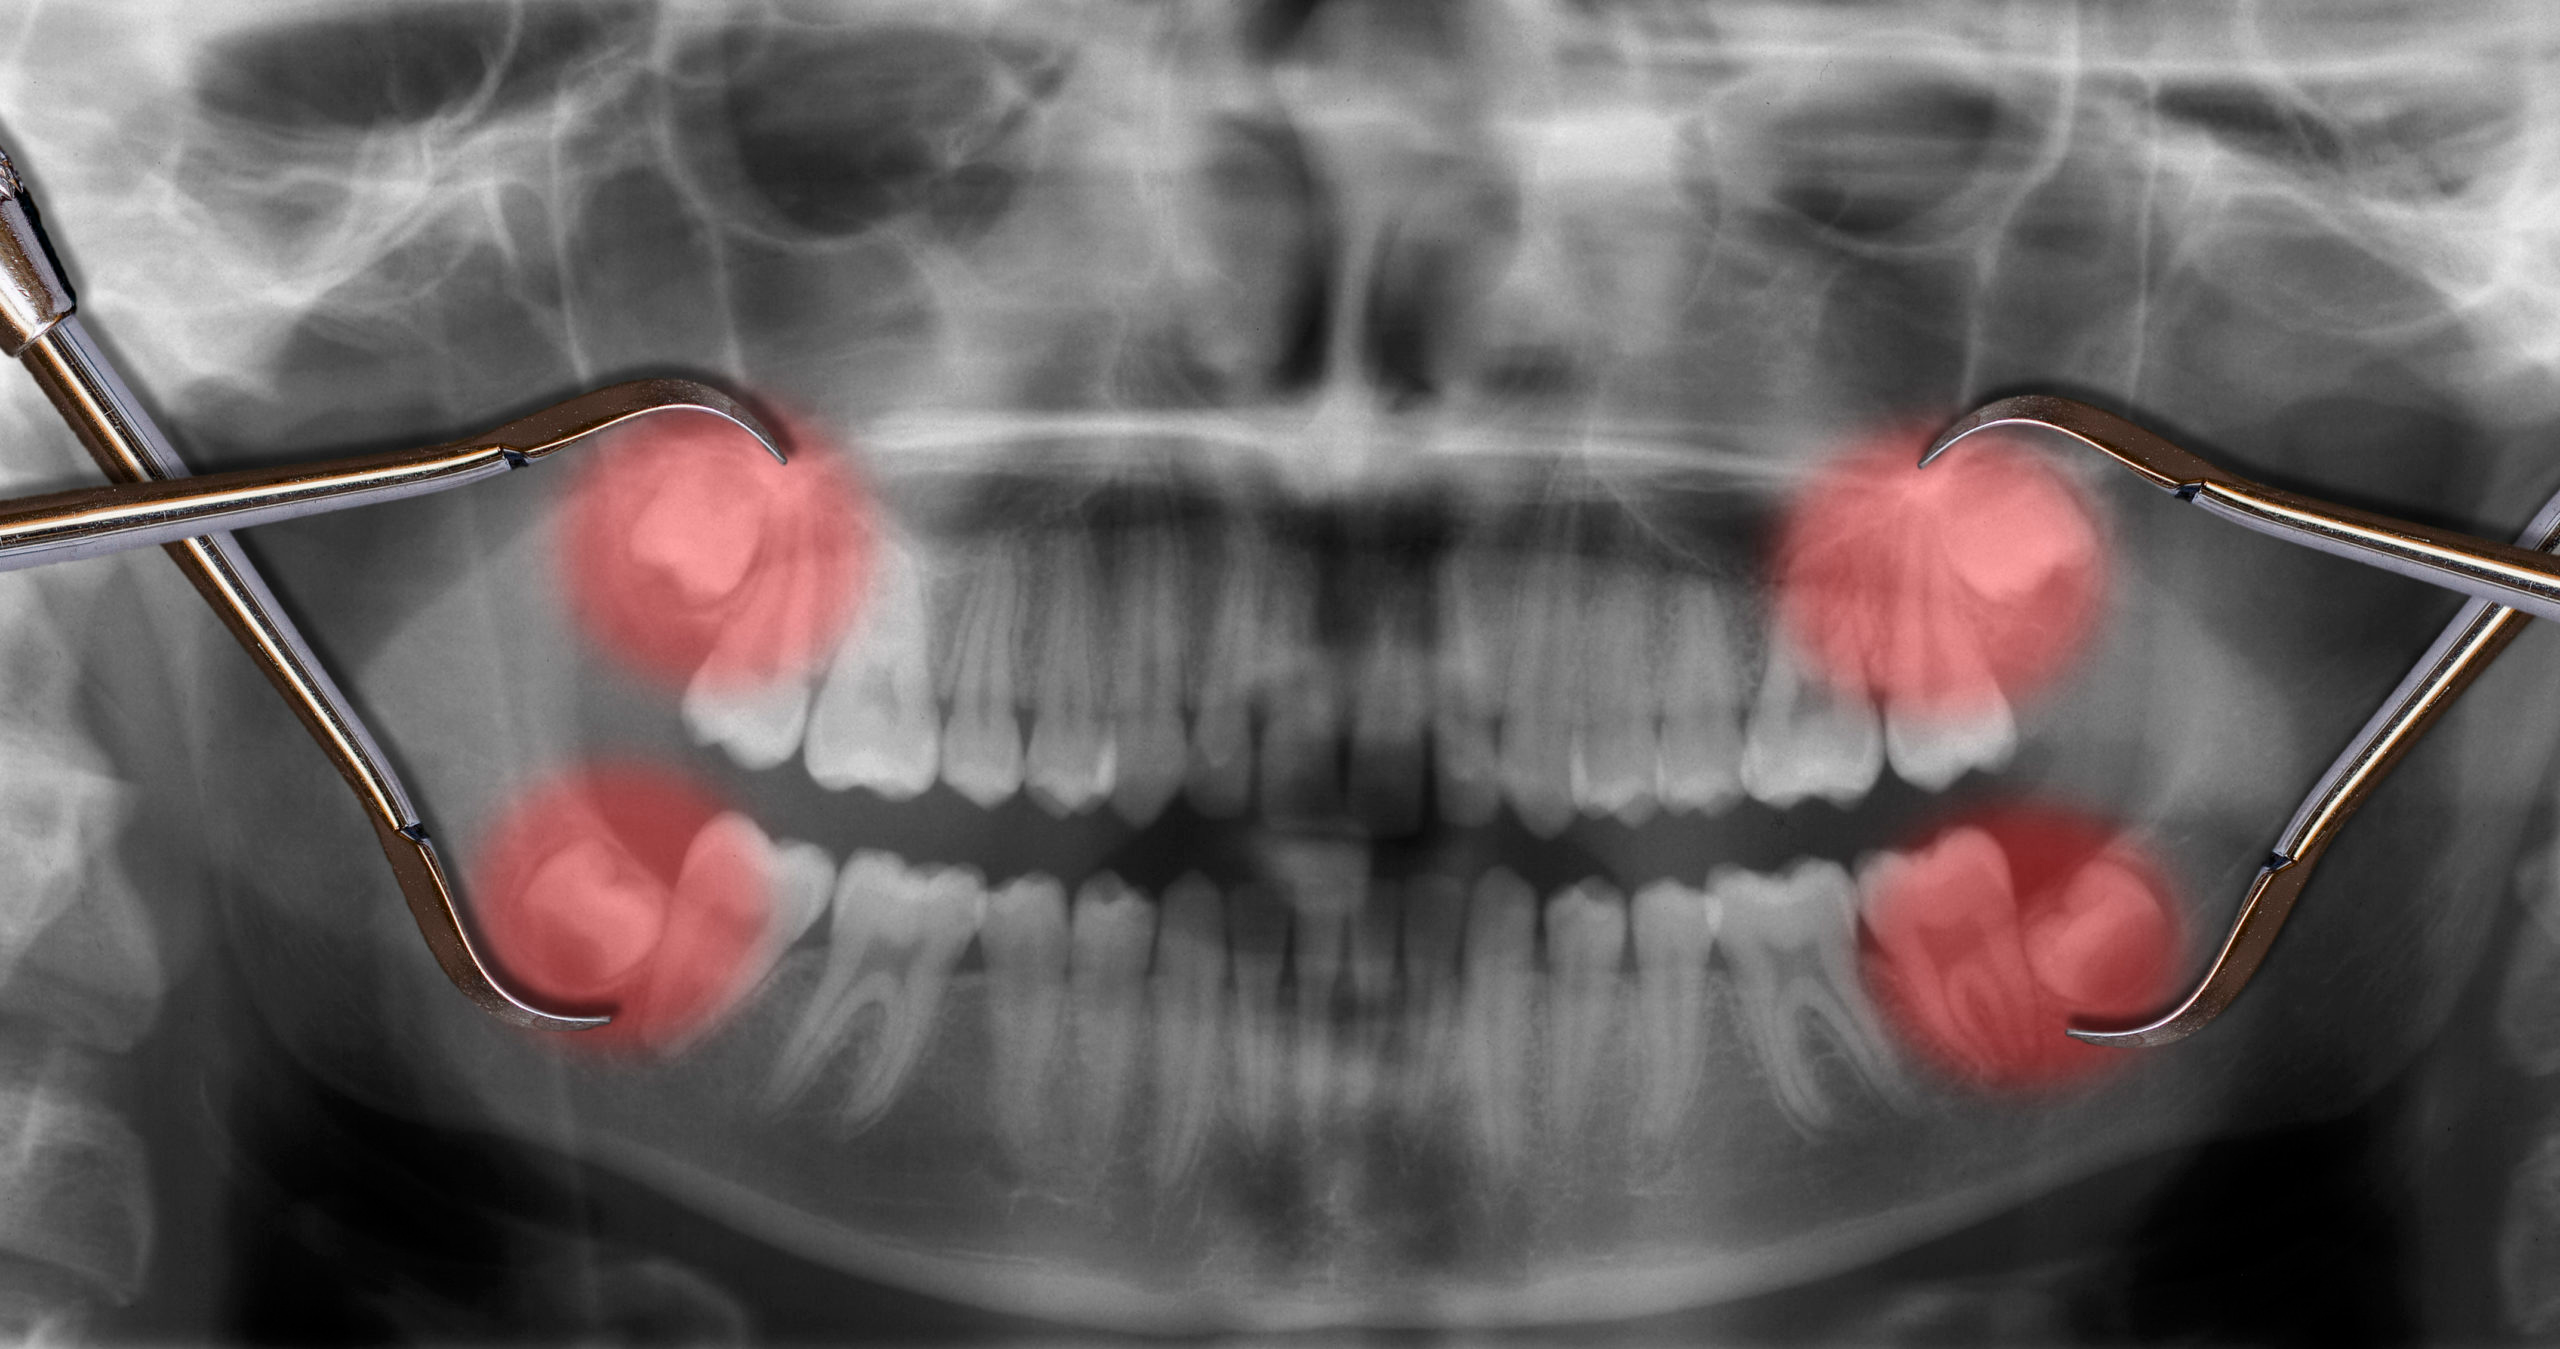 x ray showing wisdom teeth that are impacted and need to be removed